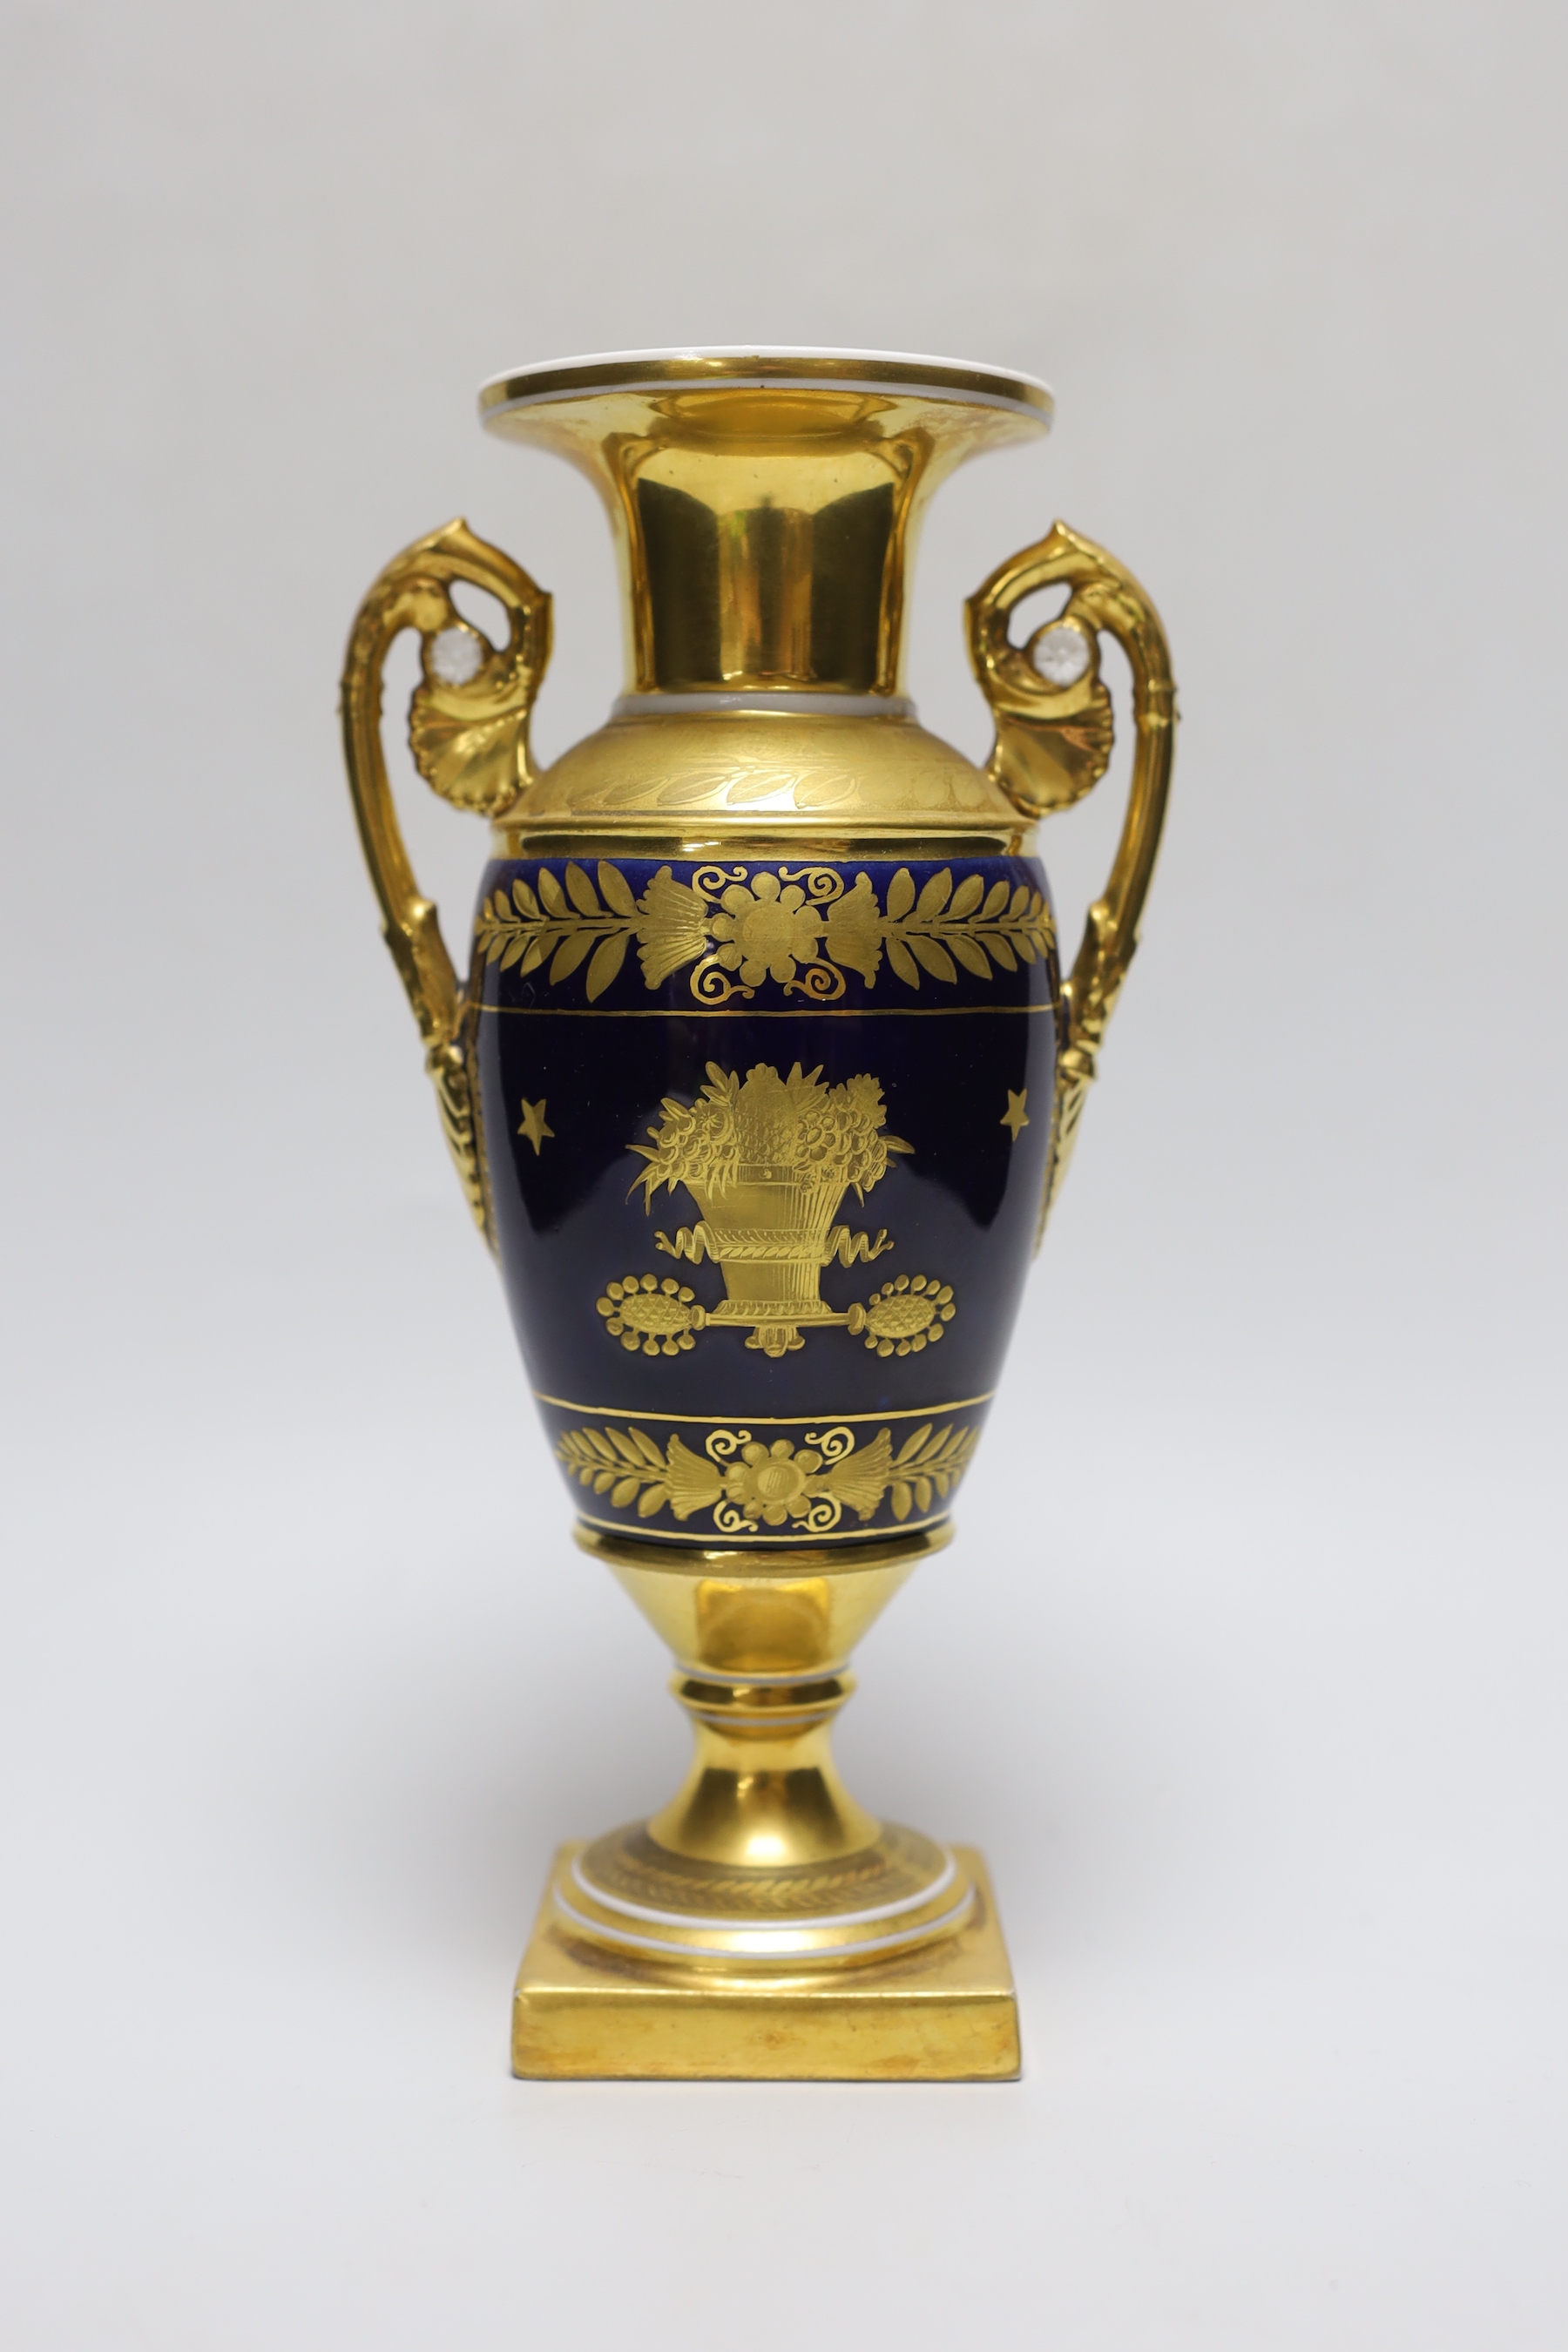 A fine Paris porcelain vase with two handles, highly gilded, the blue ground with a basket of flowers on each side, 23.5cm tall                                                                                             